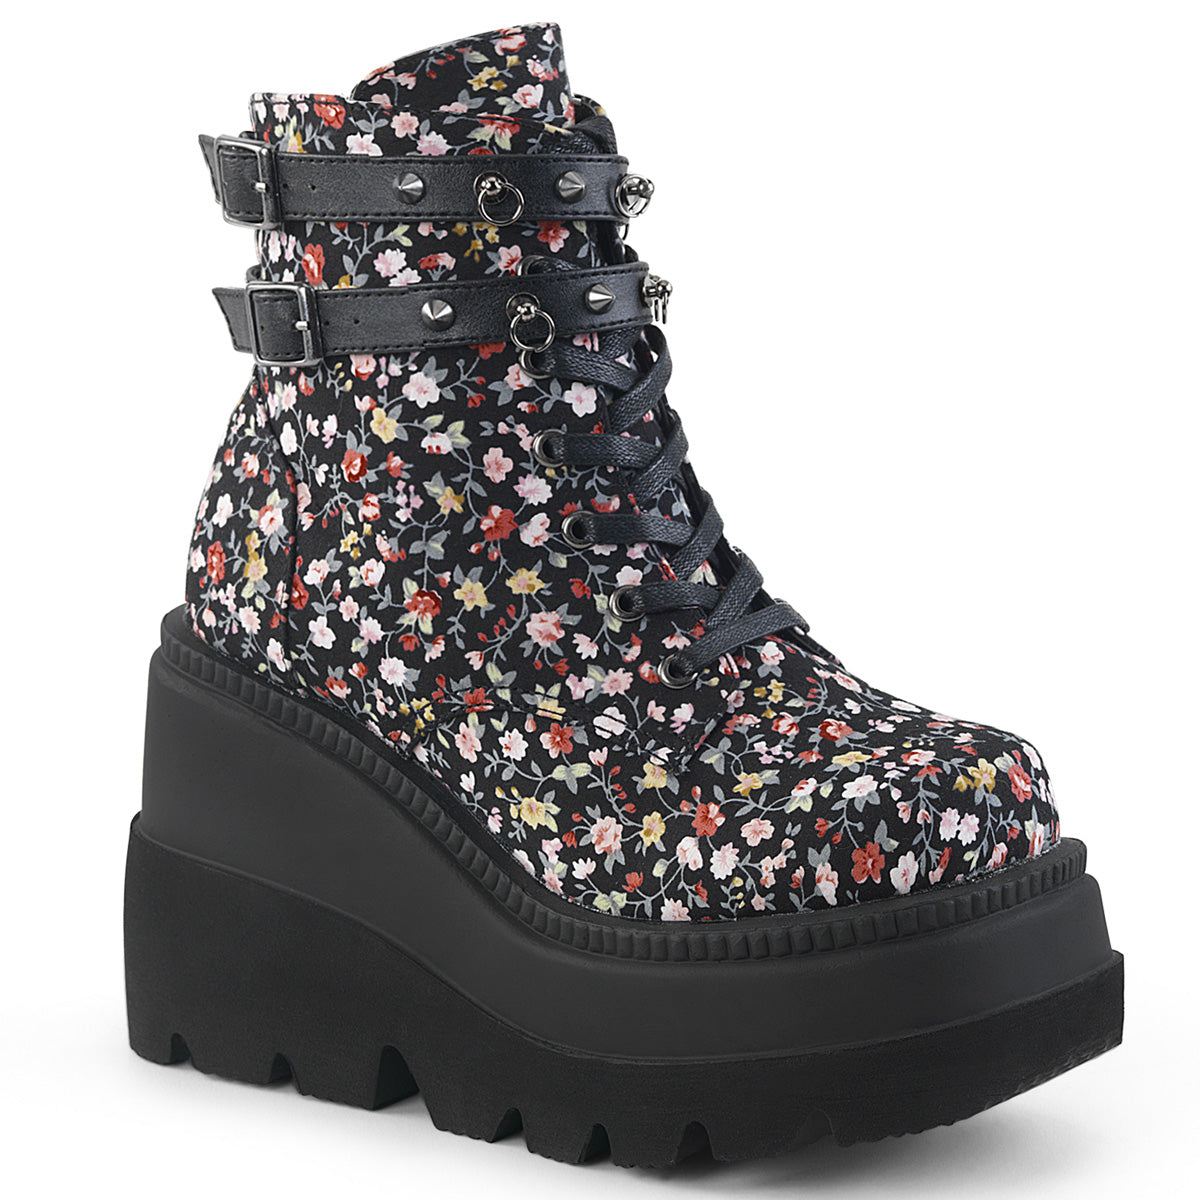 SHAKER-52ST Floral Fabric Ankle Boots